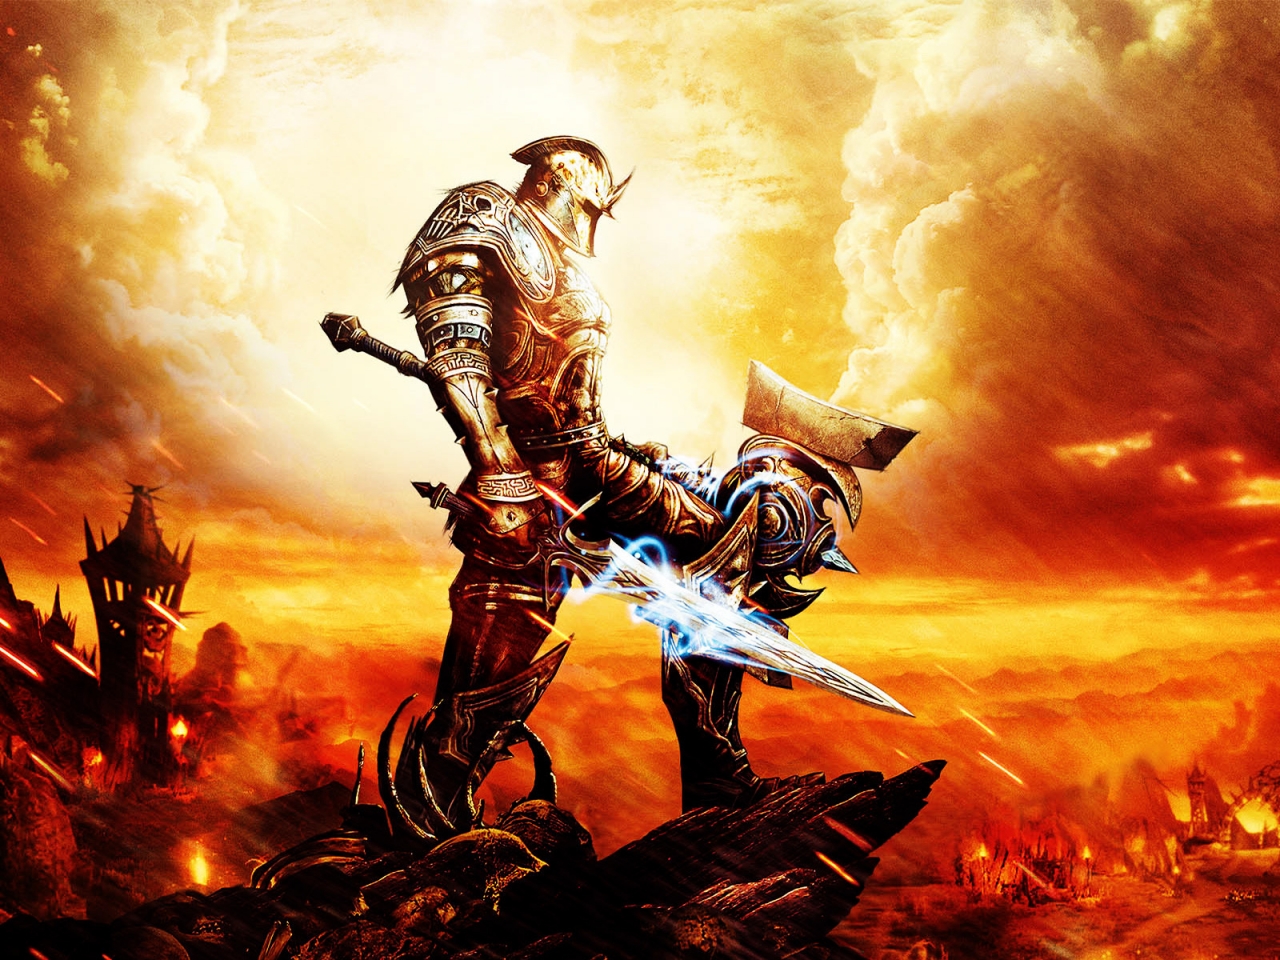 Kingdoms of Amalur Reckoning for 1280 x 960 resolution